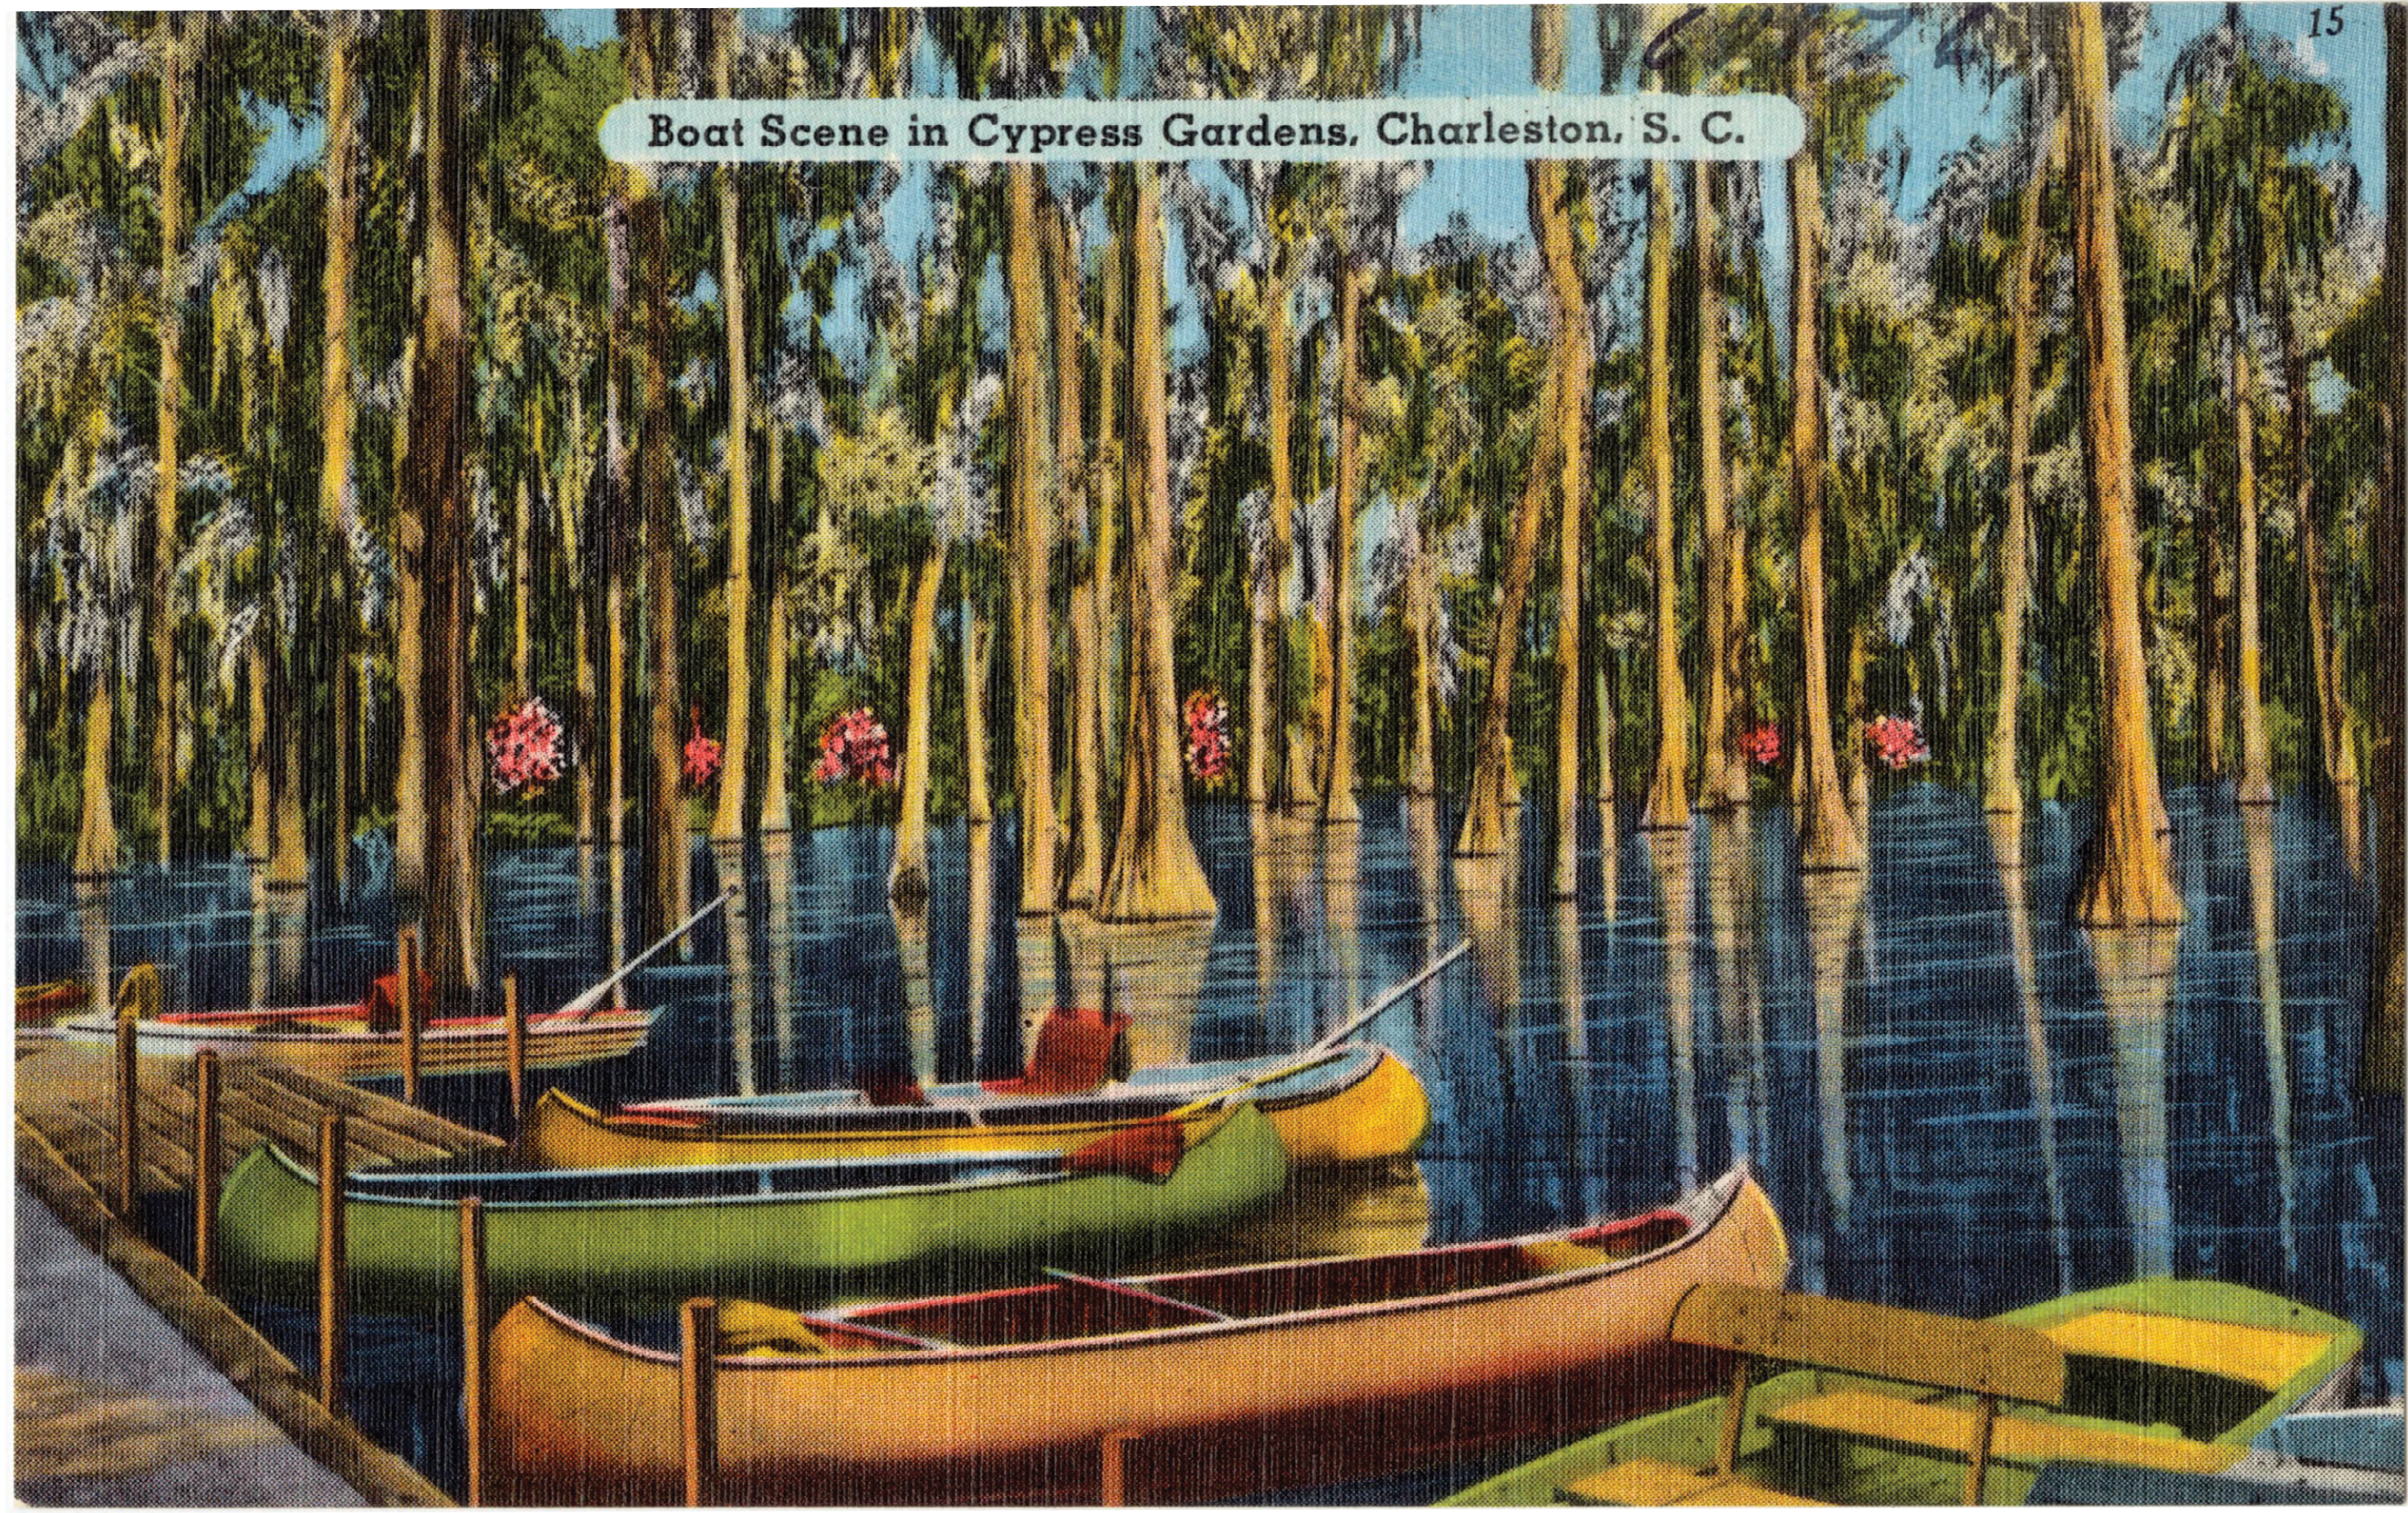 Boat Scene in Cypress Gardens: “23 miles north from Charleston are the Cypress Gardens of Dean Hall, a breathtakingly beautiful and most unique water garden. A canoe ride under the swaying moss hung tree is a delightful experience.”